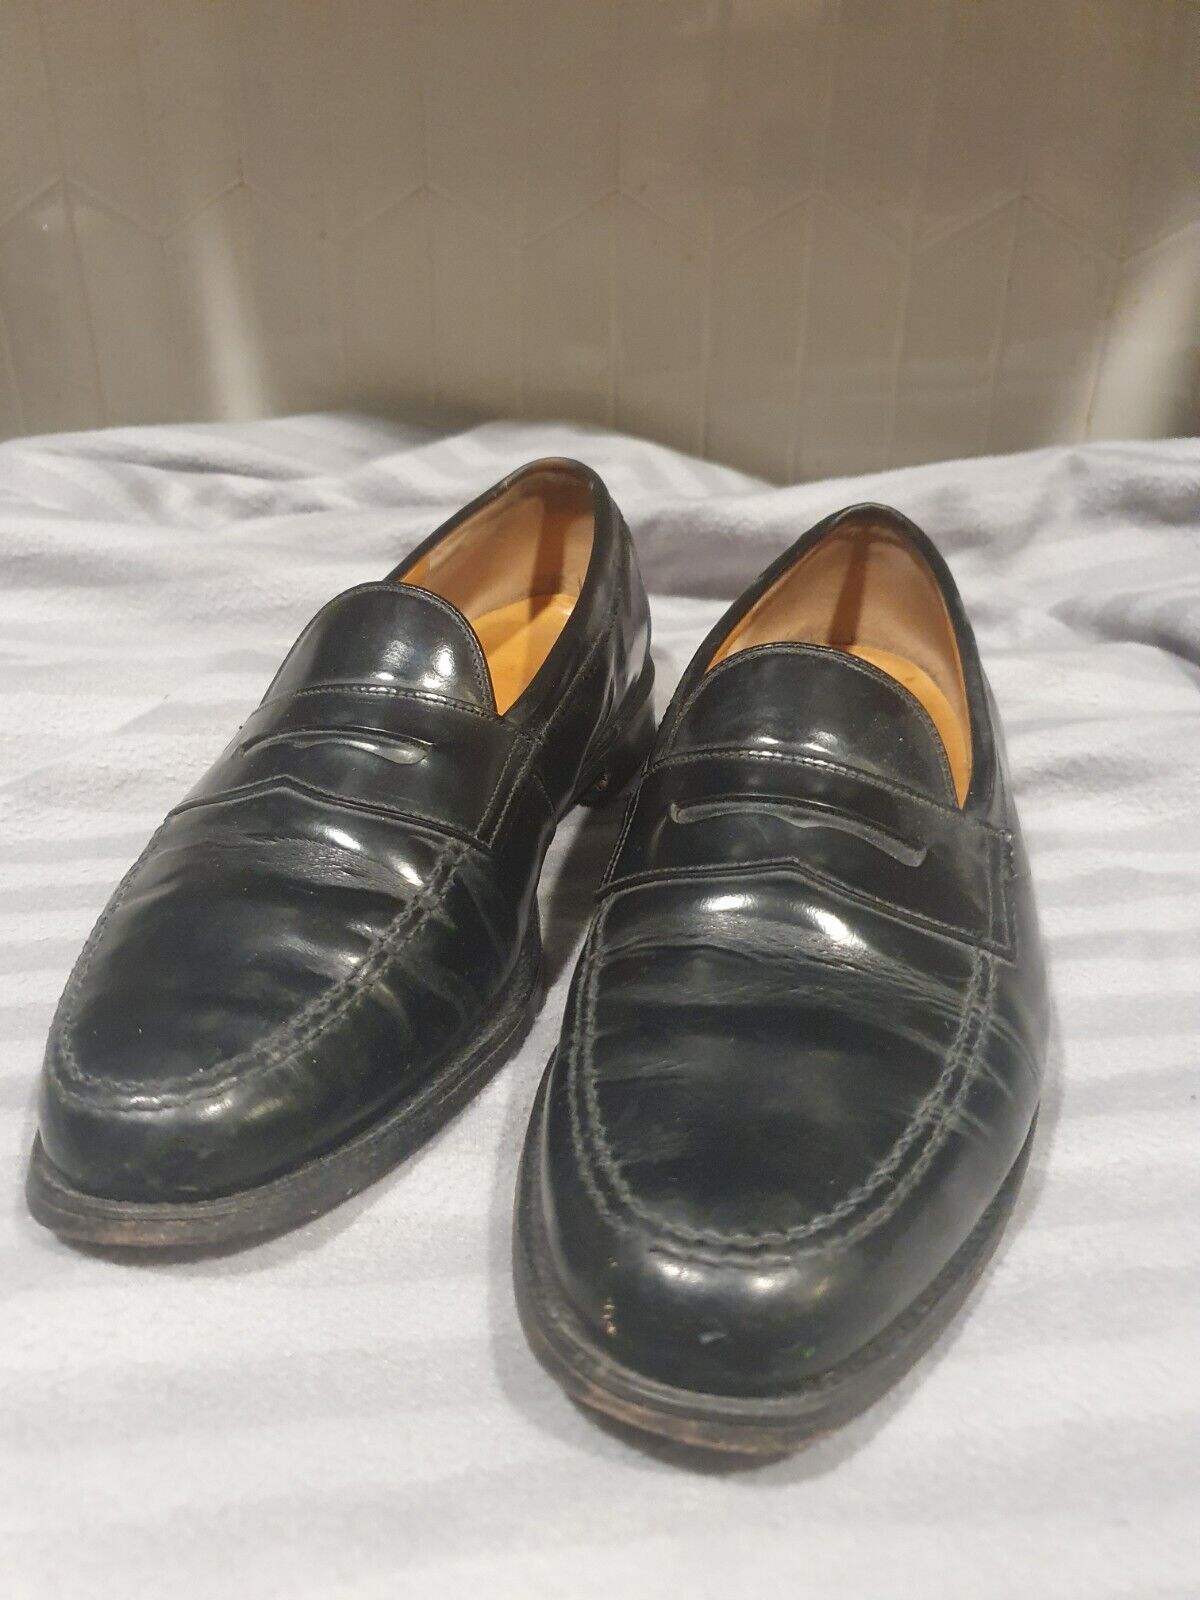 Conquer jump Serrated Loake Black Leather Penny Loafers Shoes UK 10.5 | eBay